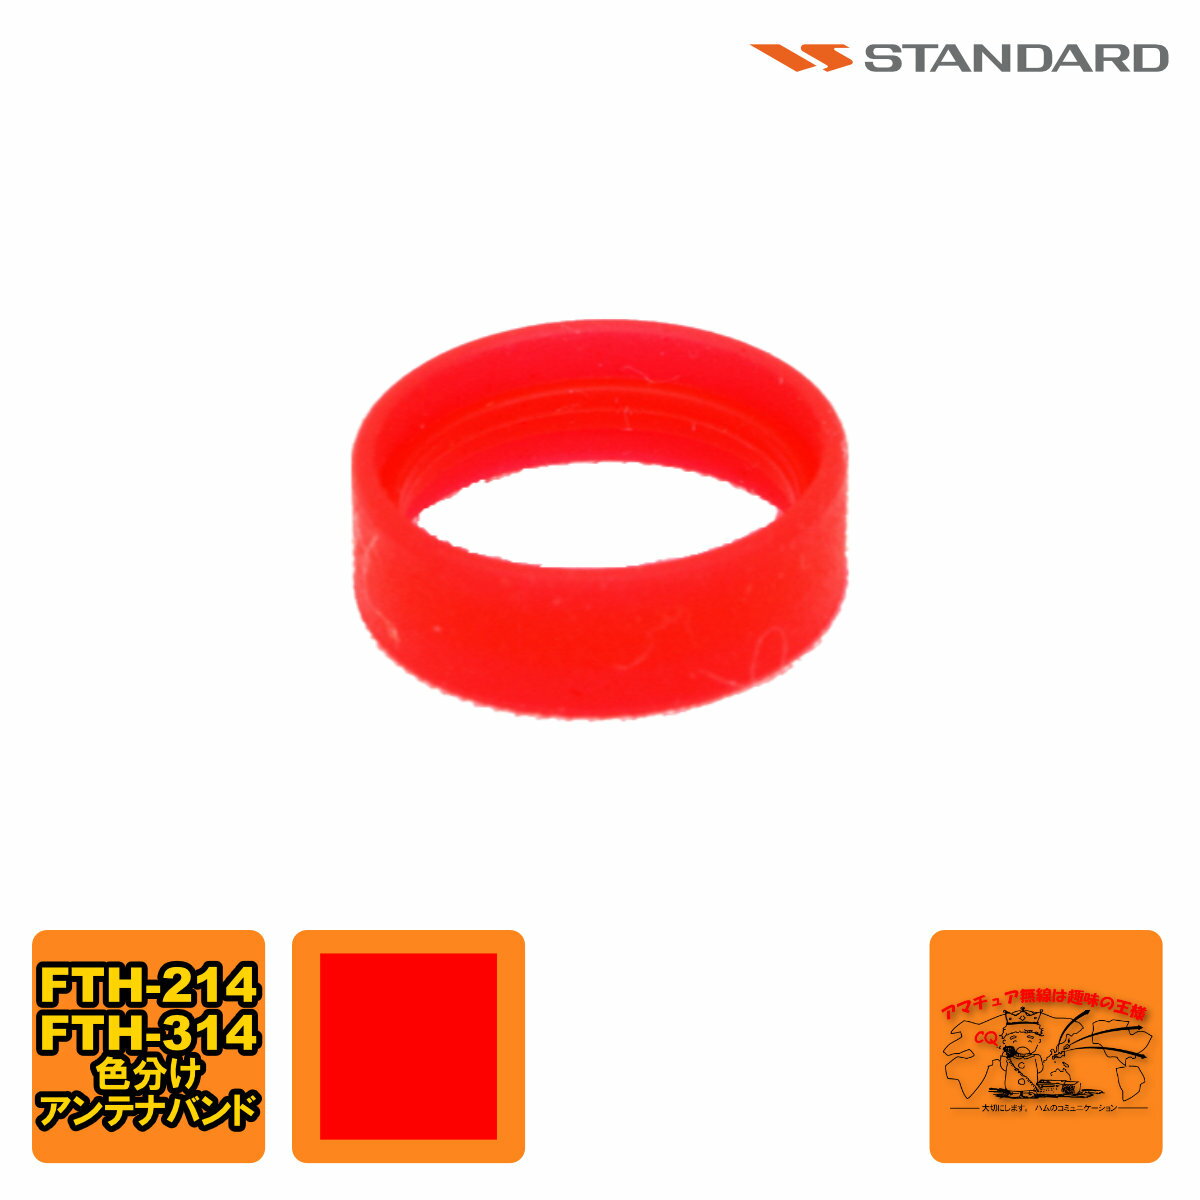 ANTENNA BAND RED S8003159 FTH-615/615L/635用 1個